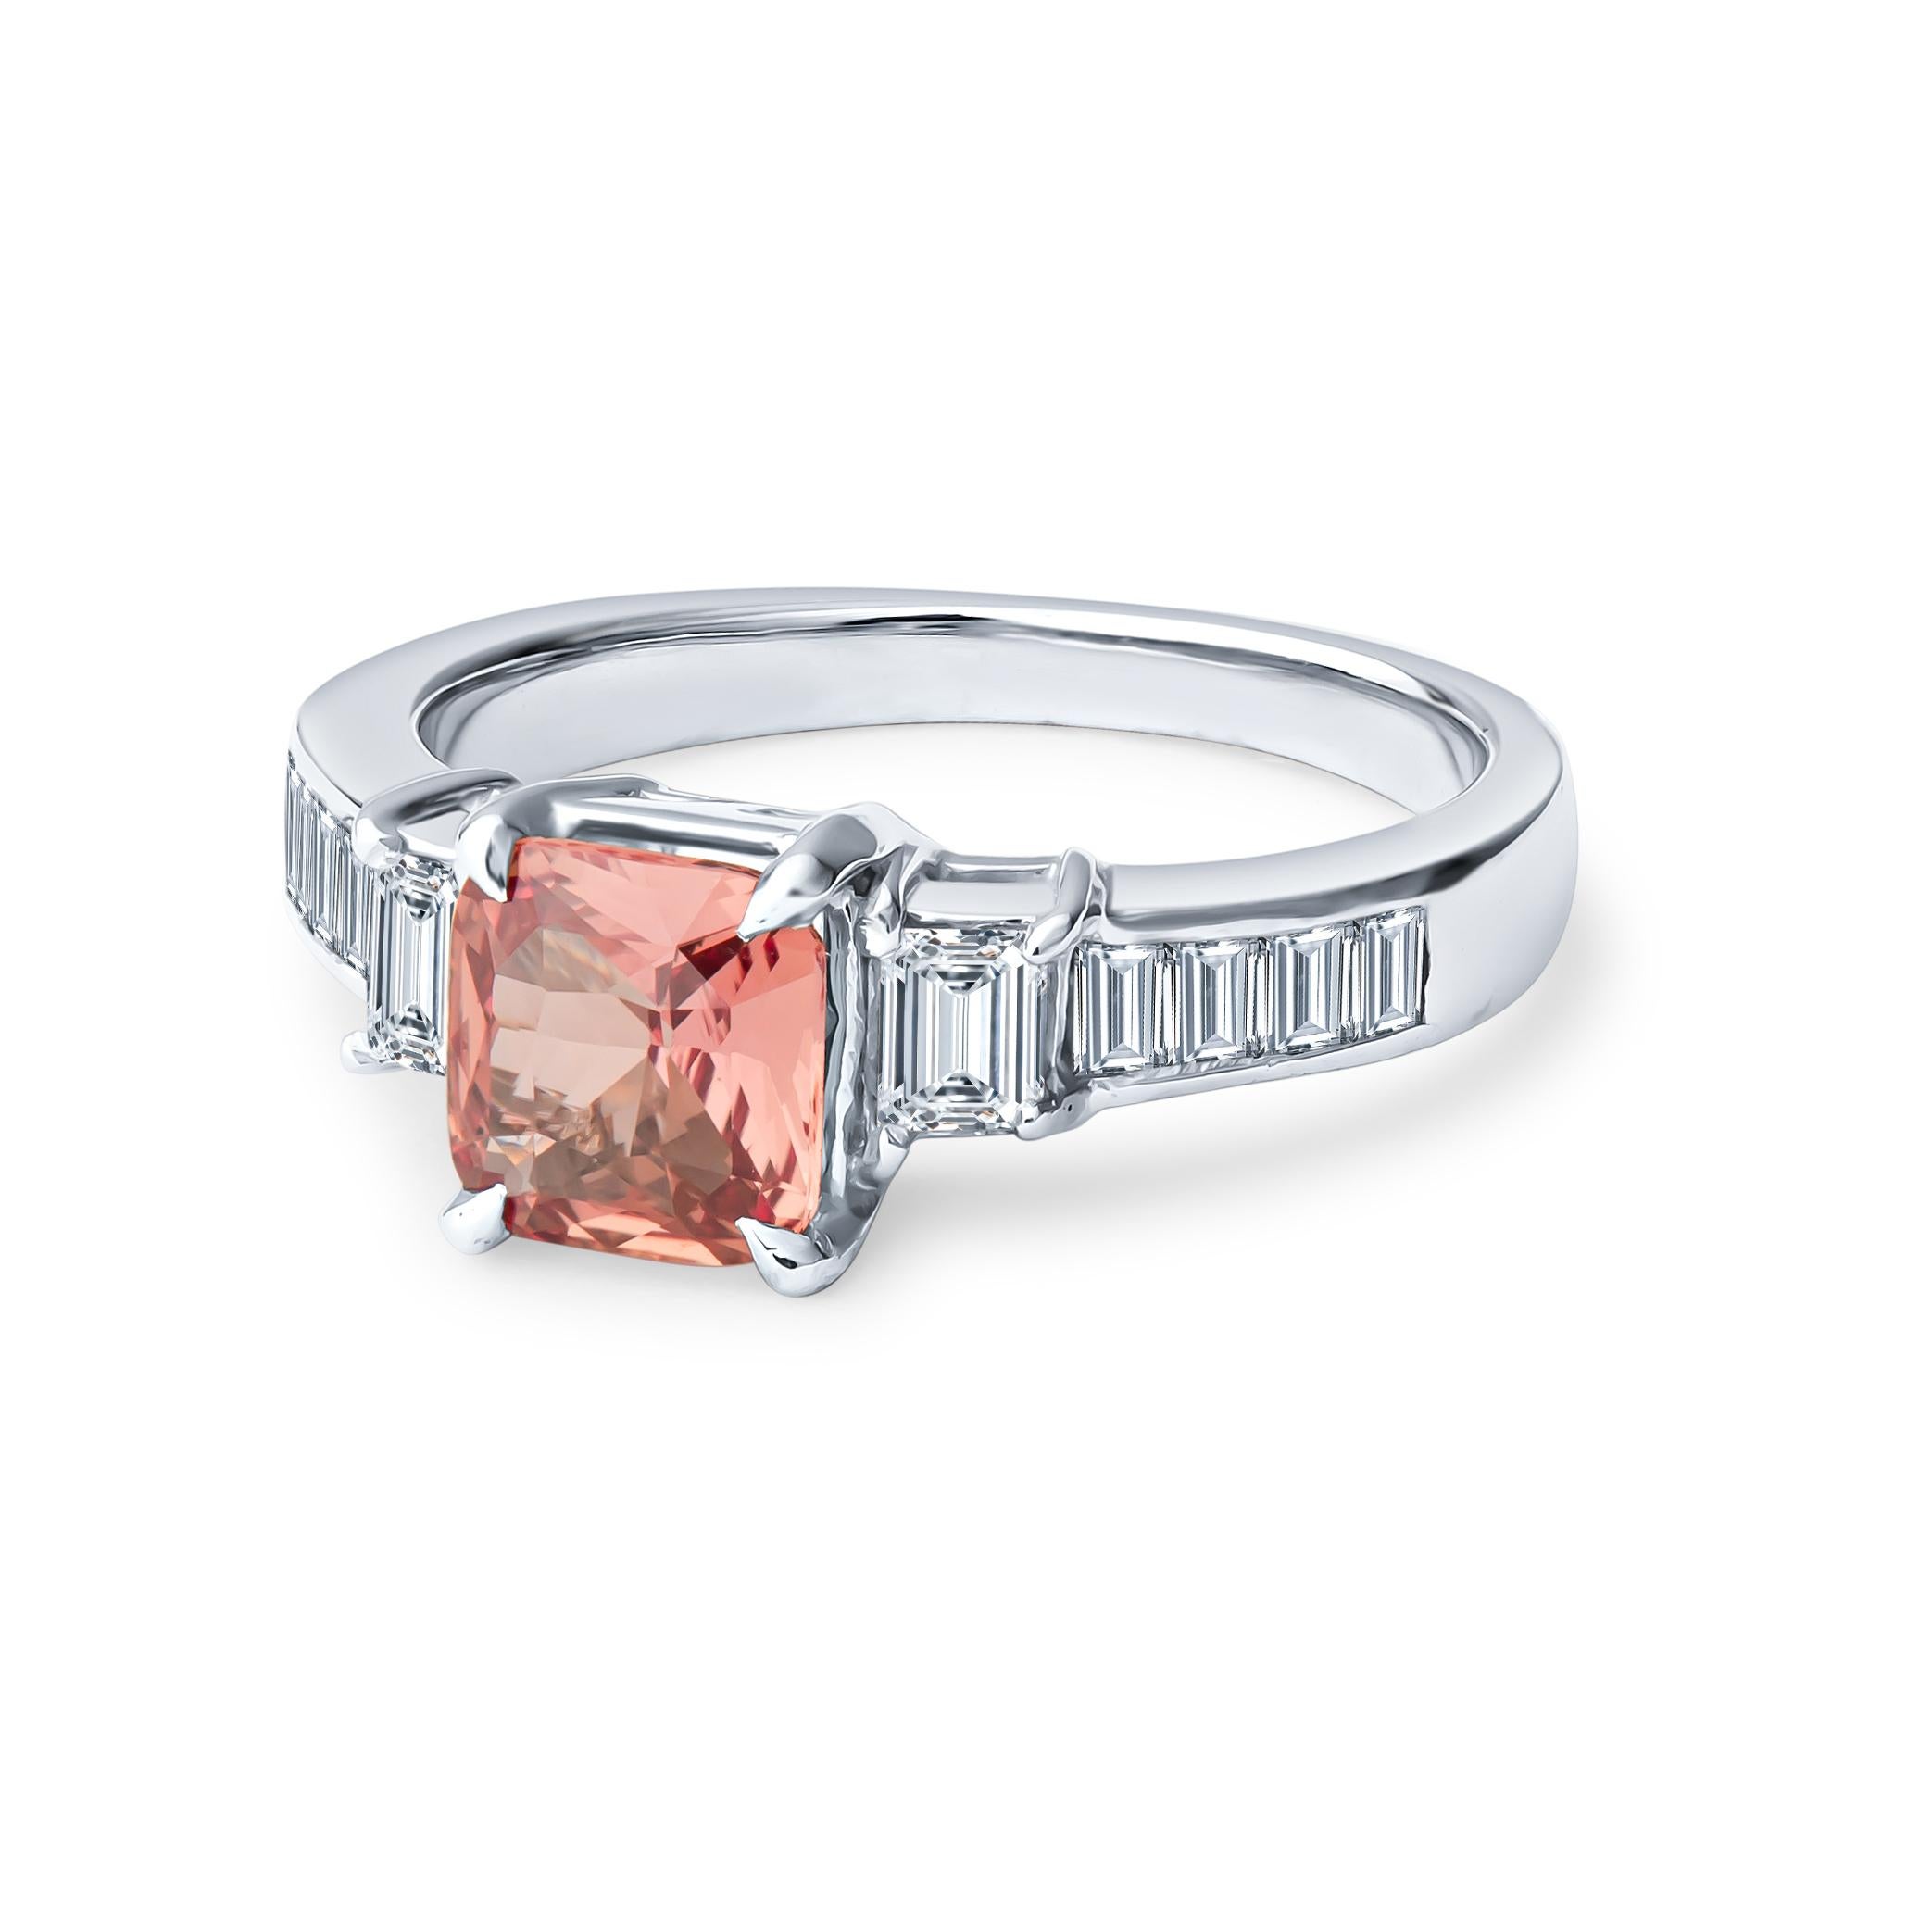 This ring features a beautiful 0.98ct, cushion cut, no heat, natural, pinkish orange Padparascha sapphire (GIA Report #5172741597) set in a platinum ring and accompanied by 0.60ctw in channel set straight baguette diamonds. The ring is a size 5, but